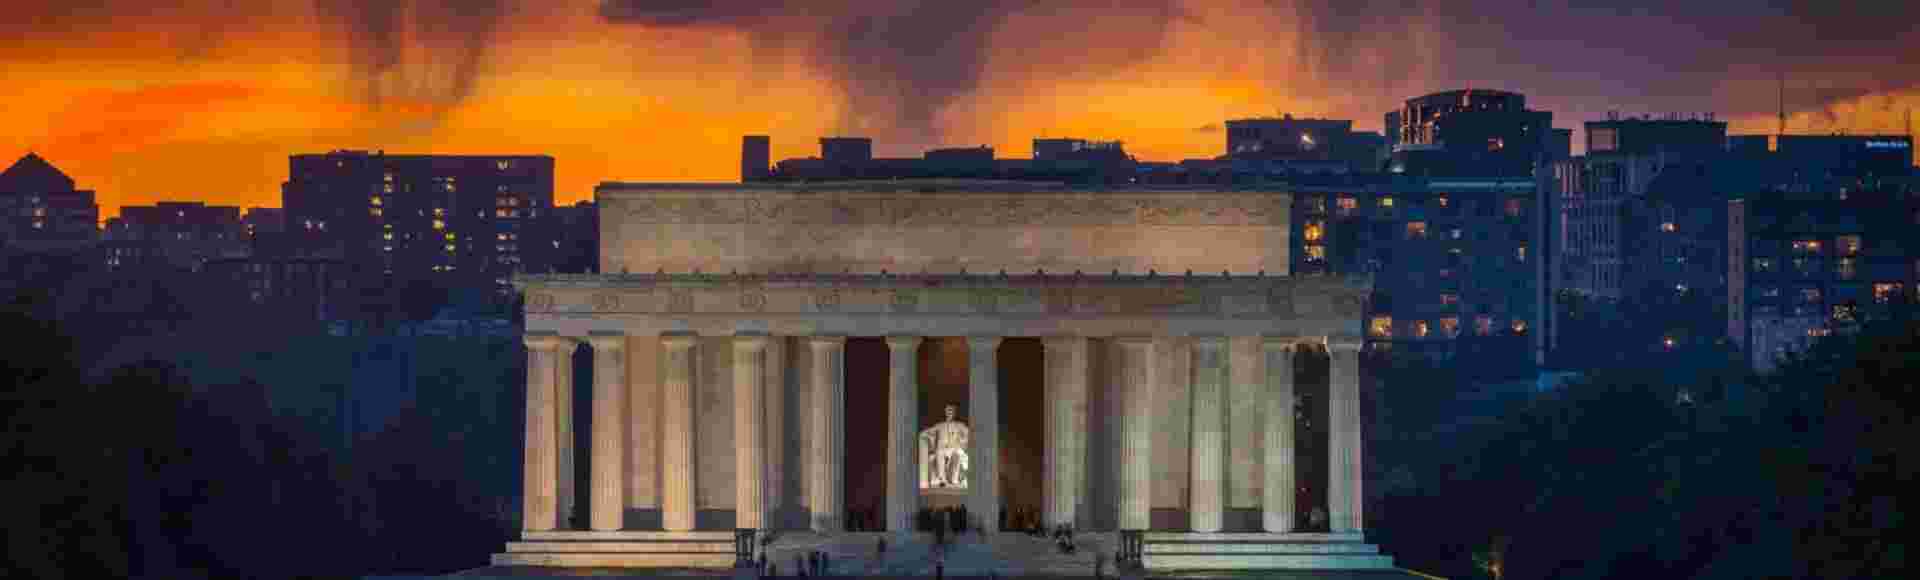 Sunset at the Lincoln Memorial in Washington DC.